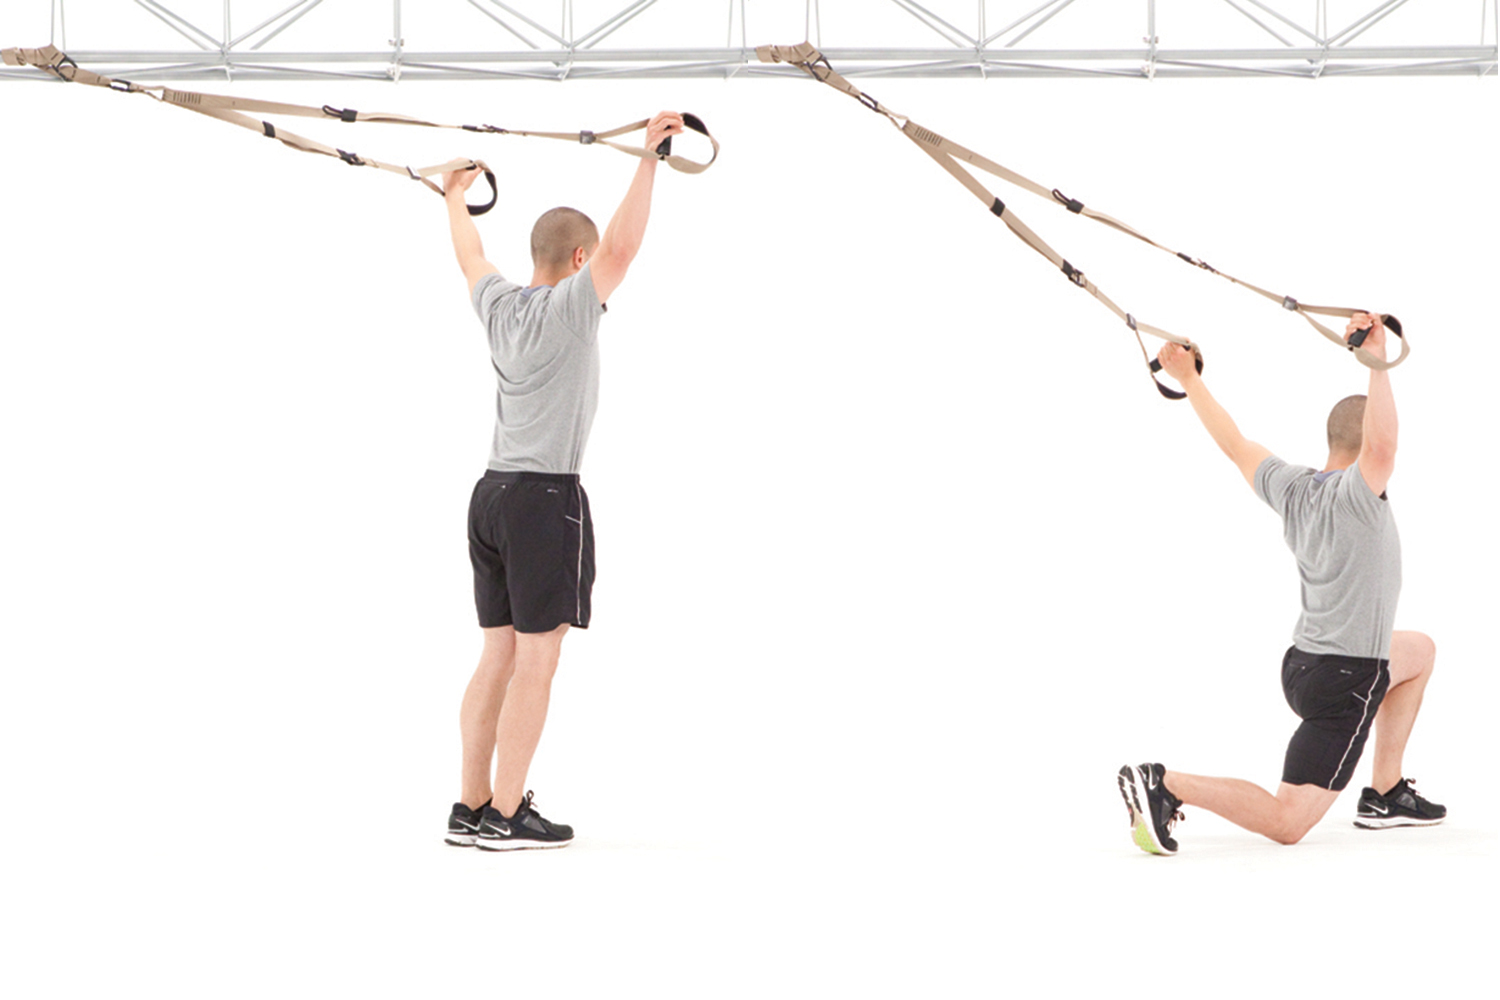 TRX Upper Body Workout for Core and Arm Strength